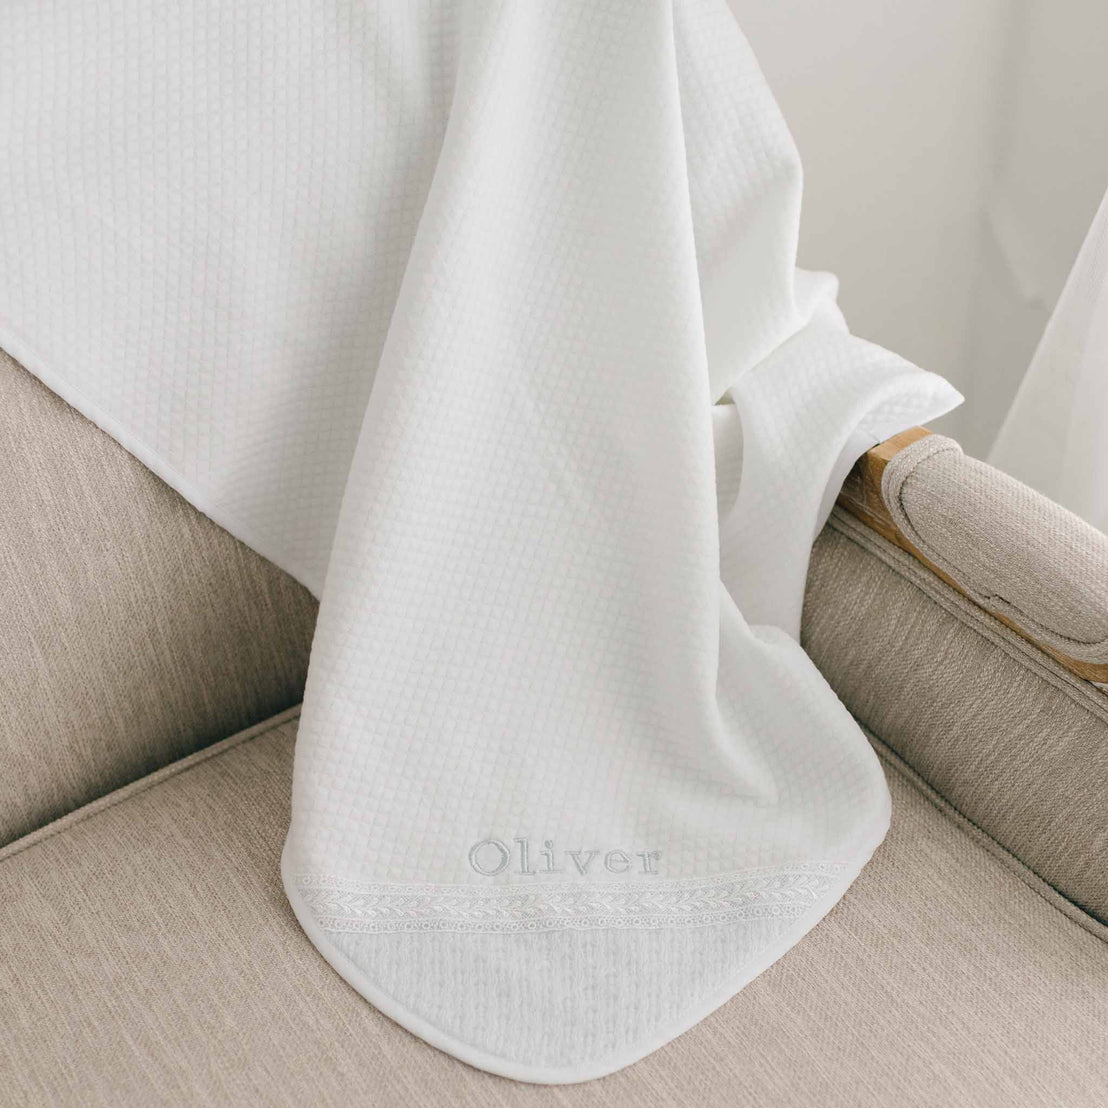 A white Oliver Personalized Blanket drapes over the armrest of a beige upholstered chair. The blanket is crafted from a white textured pima cotton and features the name "Oliver" embroidered on the corner.